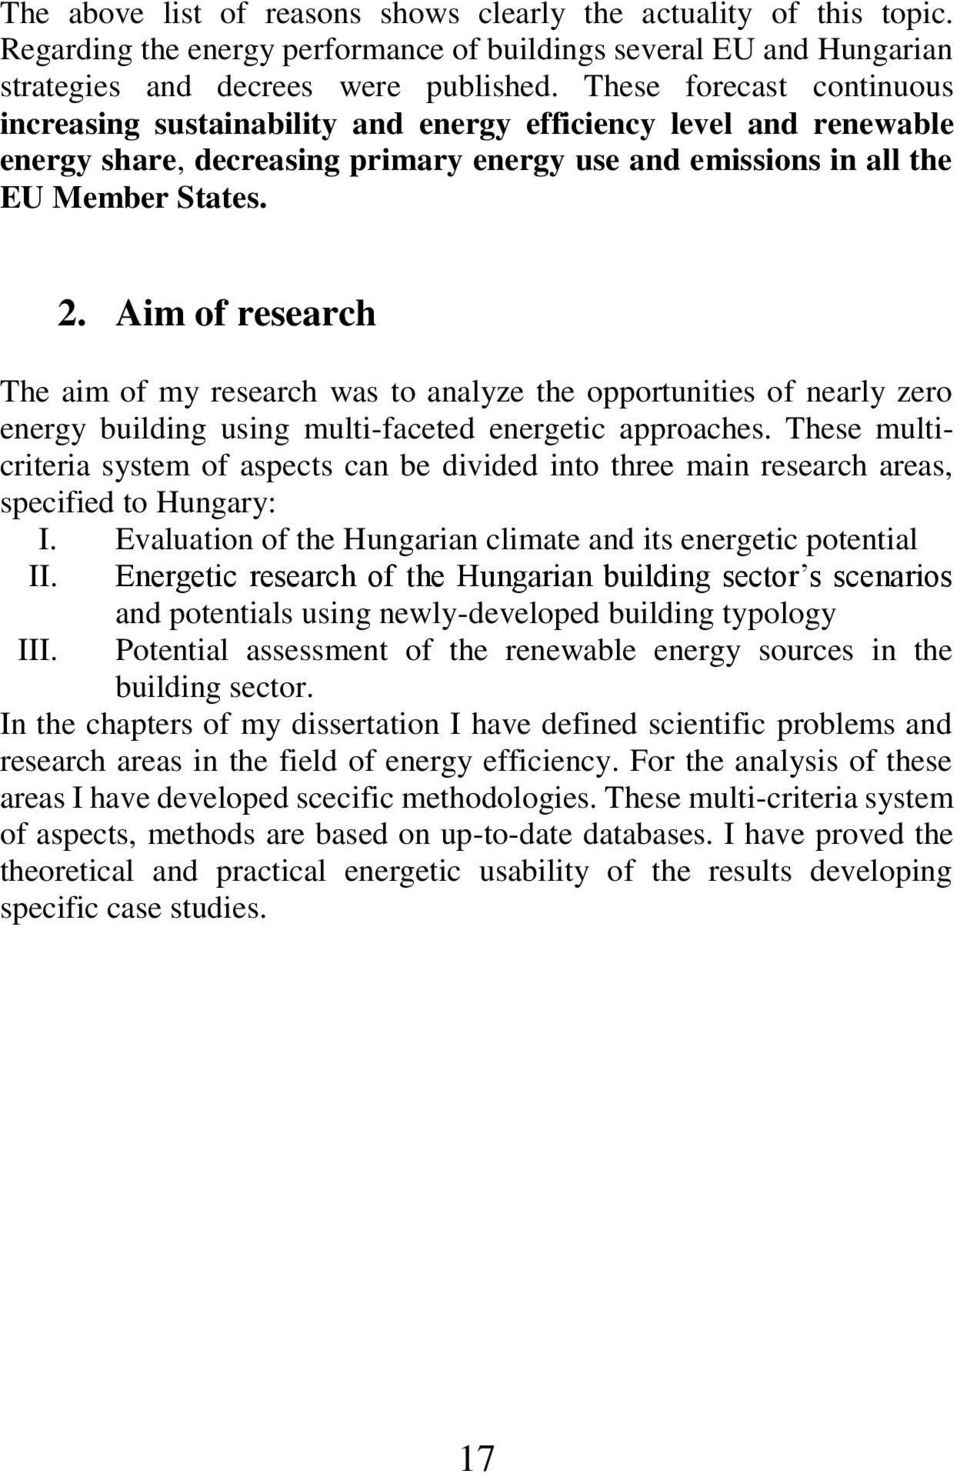 Aim of research The aim of my research was to analyze the opportunities of nearly zero energy building using multi-faceted energetic approaches.